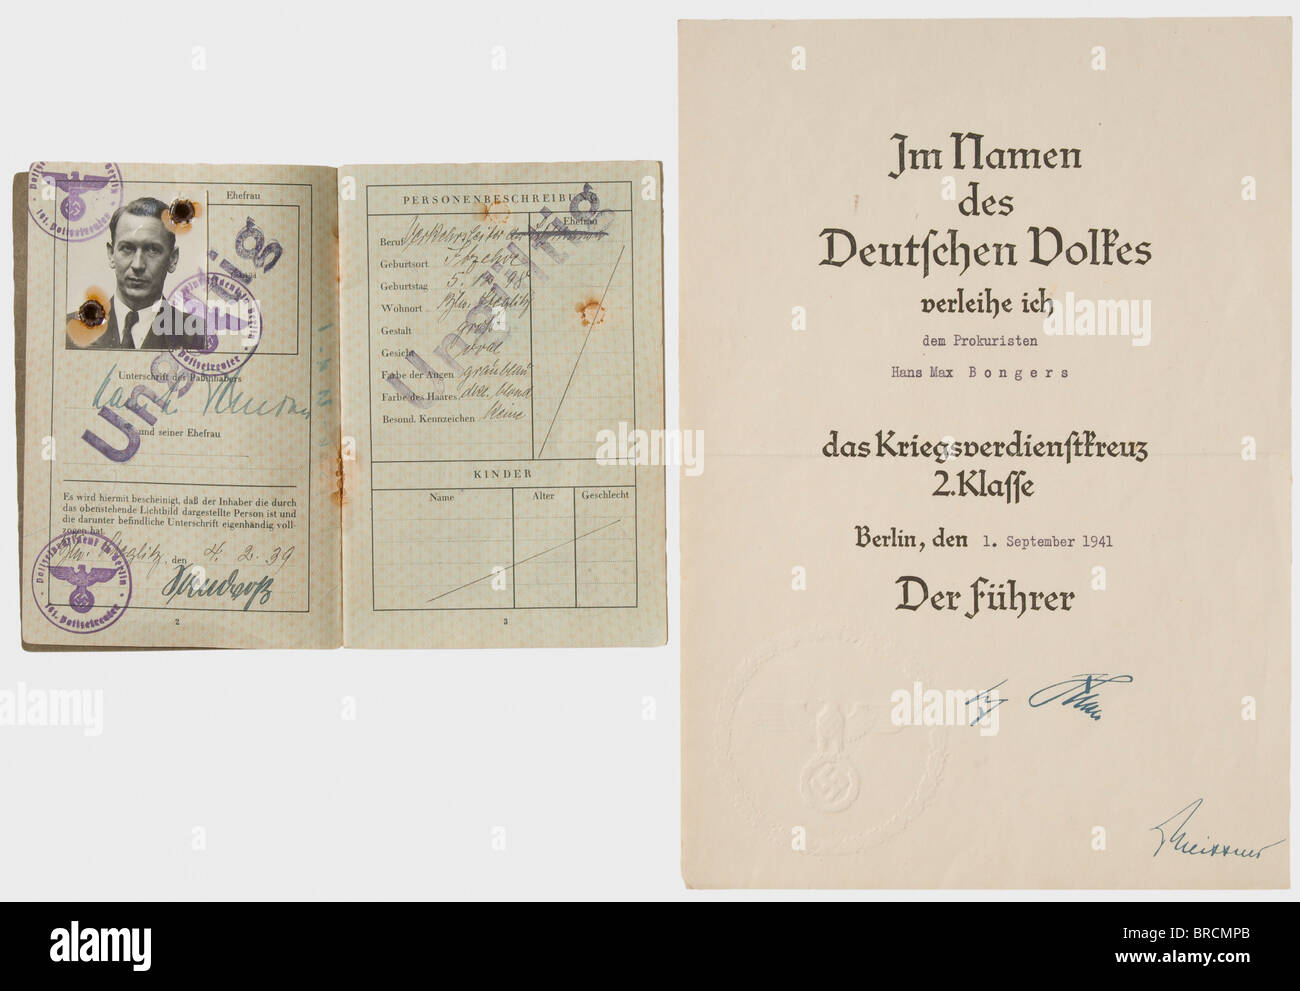 Hans M. Bongers, a pioneer of German civil aviation (1898 - 1981), awards and documents Passport, 1939 with numerous visas and entries. A historic, historical, people, 1930s, 1930s, 20th century, troop, troops, armed forces, military, militaria, army, wing, group, air force, air forces, document, documents, object, objects, stills, clipping, clippings, cut out, cut-out, cut-outs, Stock Photo